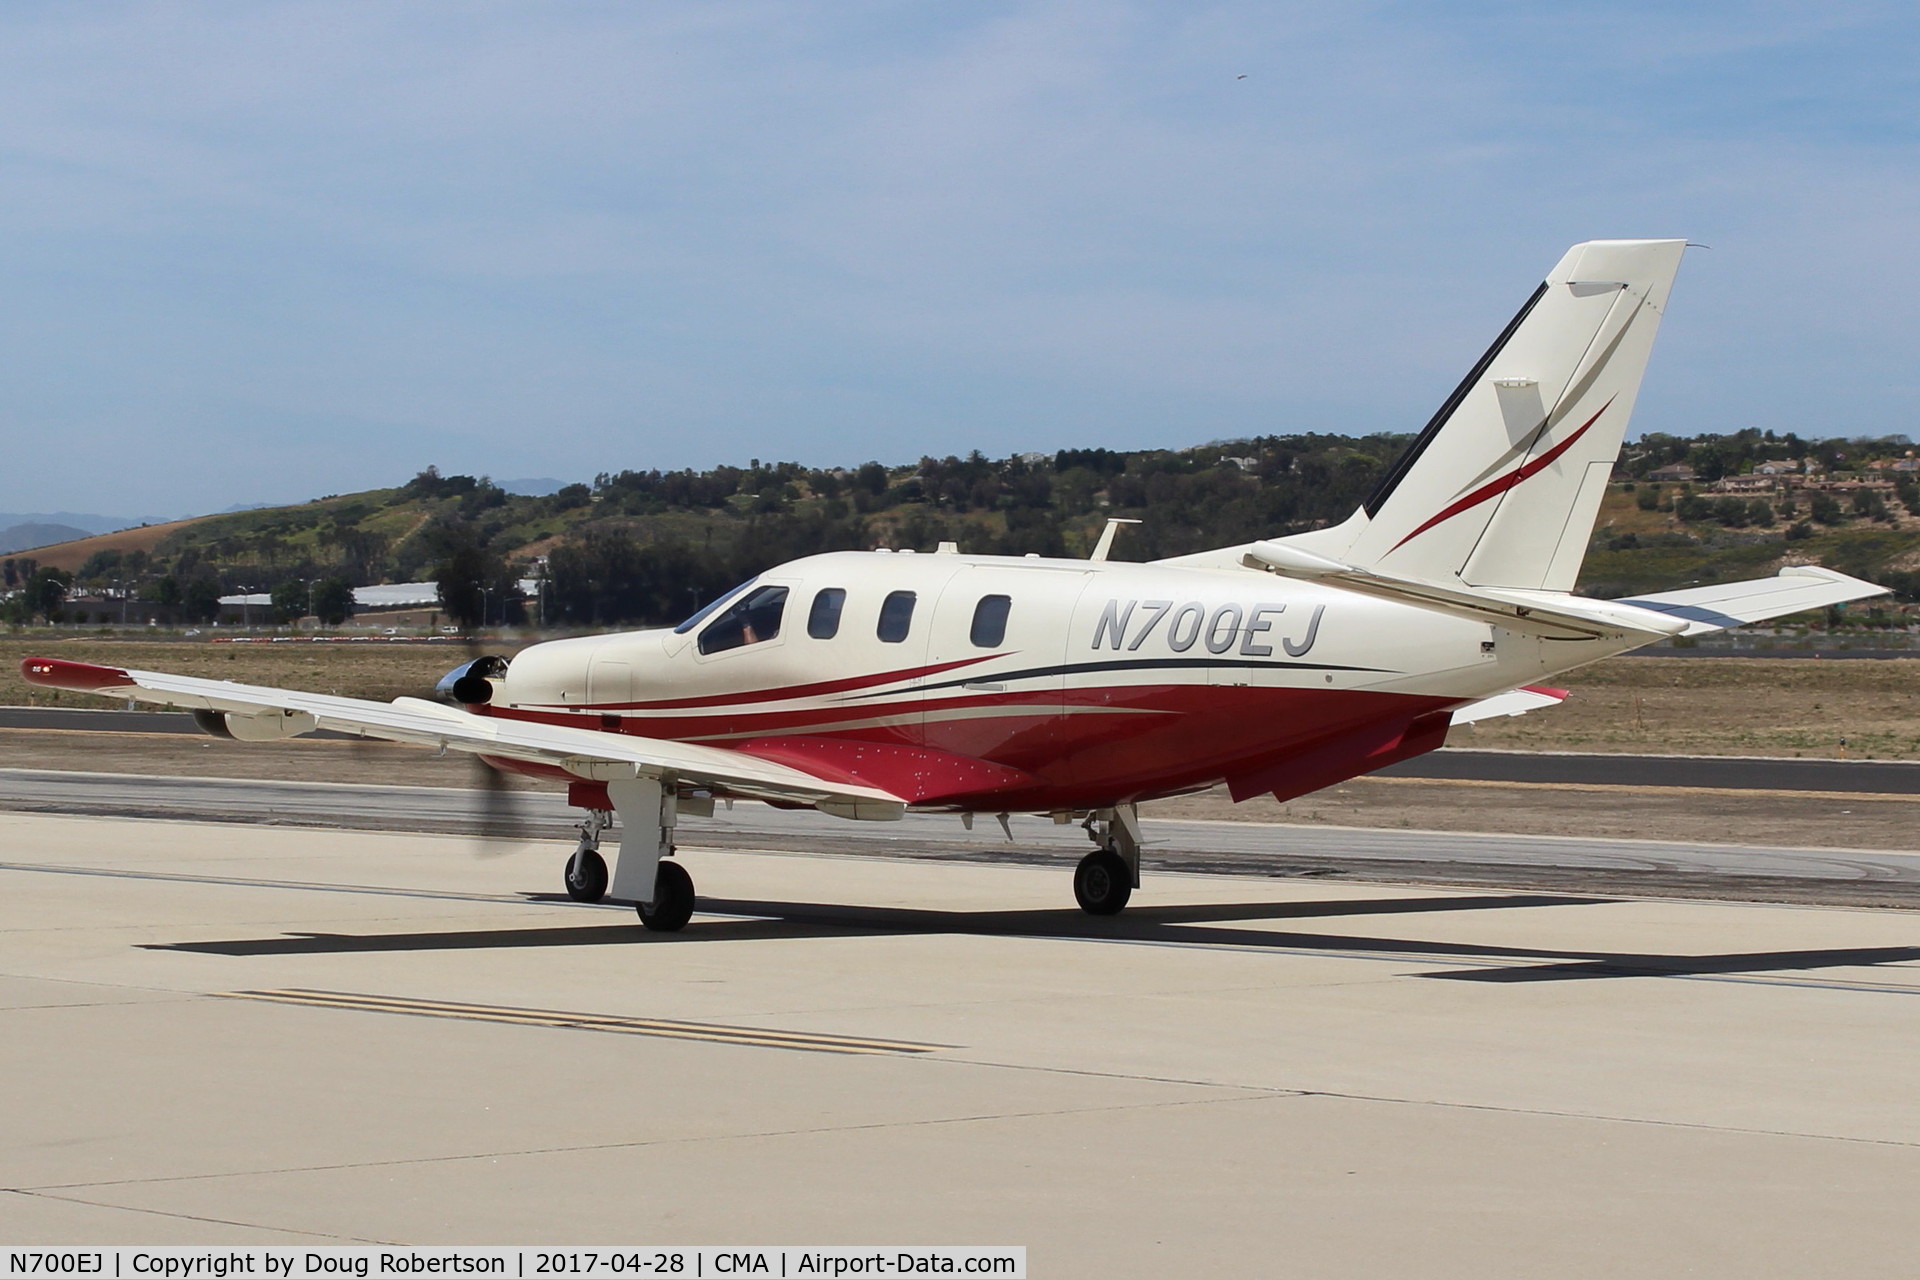 N700EJ, 2004 Socata TBM-700 C/N 291, 2004 Socata TBM 700, one P&W(C)PT6A-64 turboprop 1,580 sHp flat-rated to 700 sHp, taxi with cowl partly off